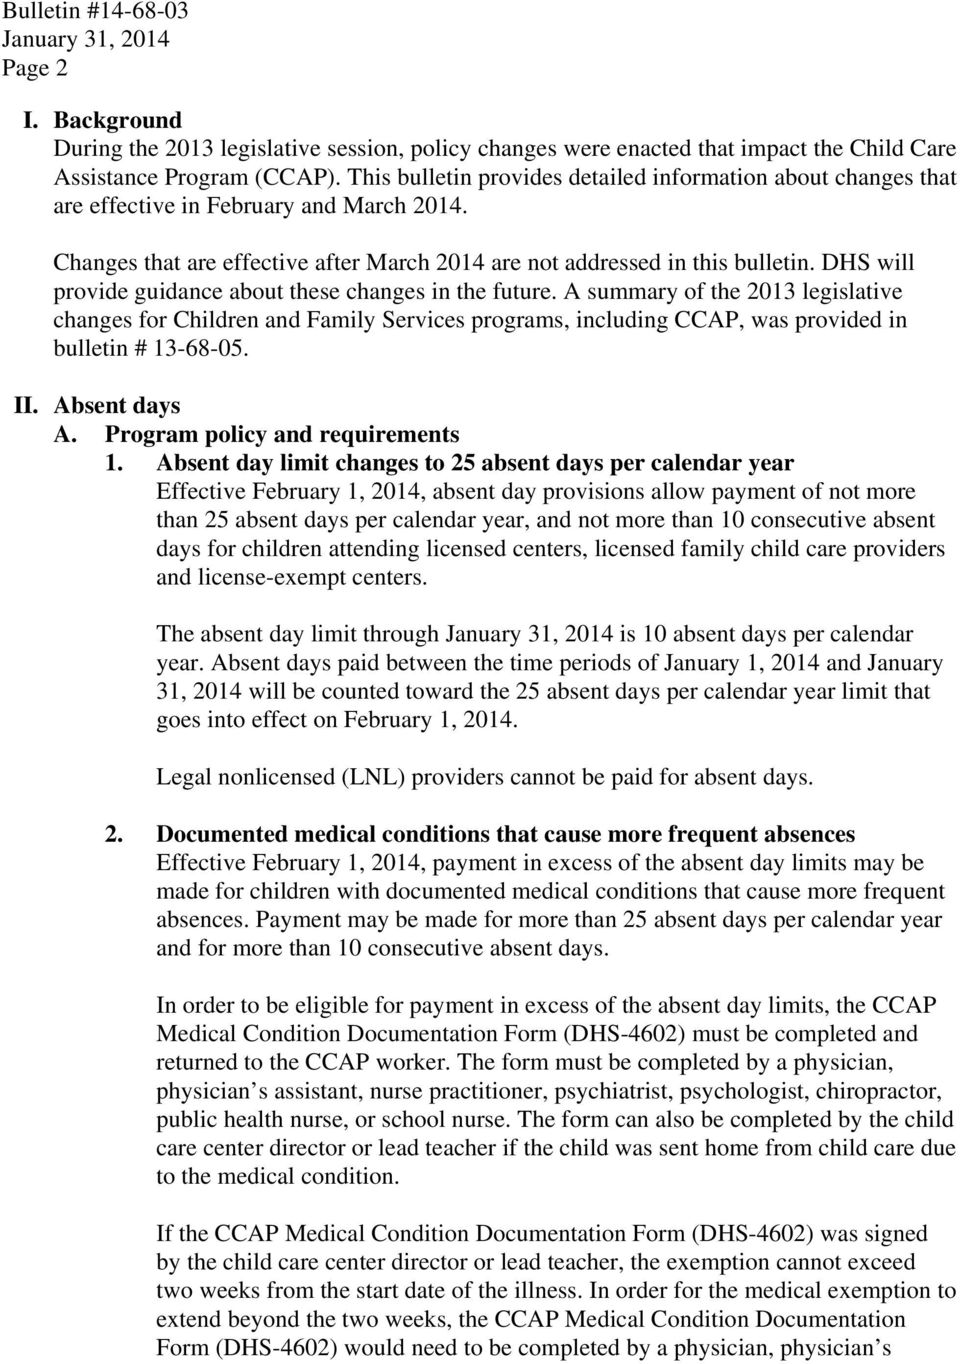 DHS will provide guidance about these changes in the future. A summary of the 2013 legislative changes for Children and Family Services programs, including CCAP, was provided in bulletin # 13-68-05.